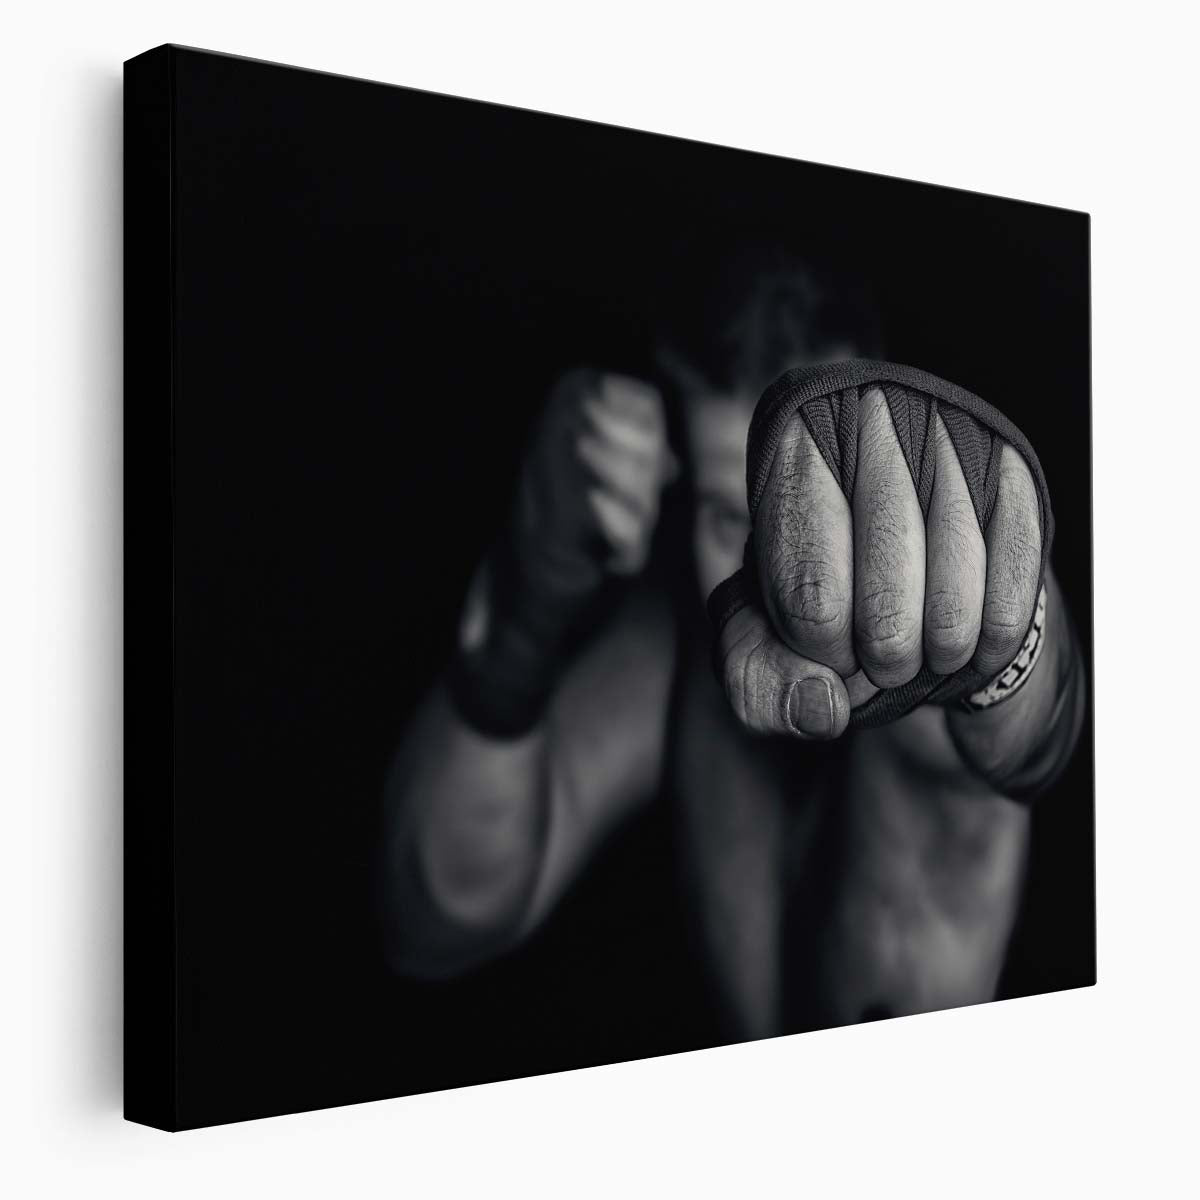 Monochrome Boxing Action Punch Portrait Wall Art by Luxuriance Designs. Made in USA.